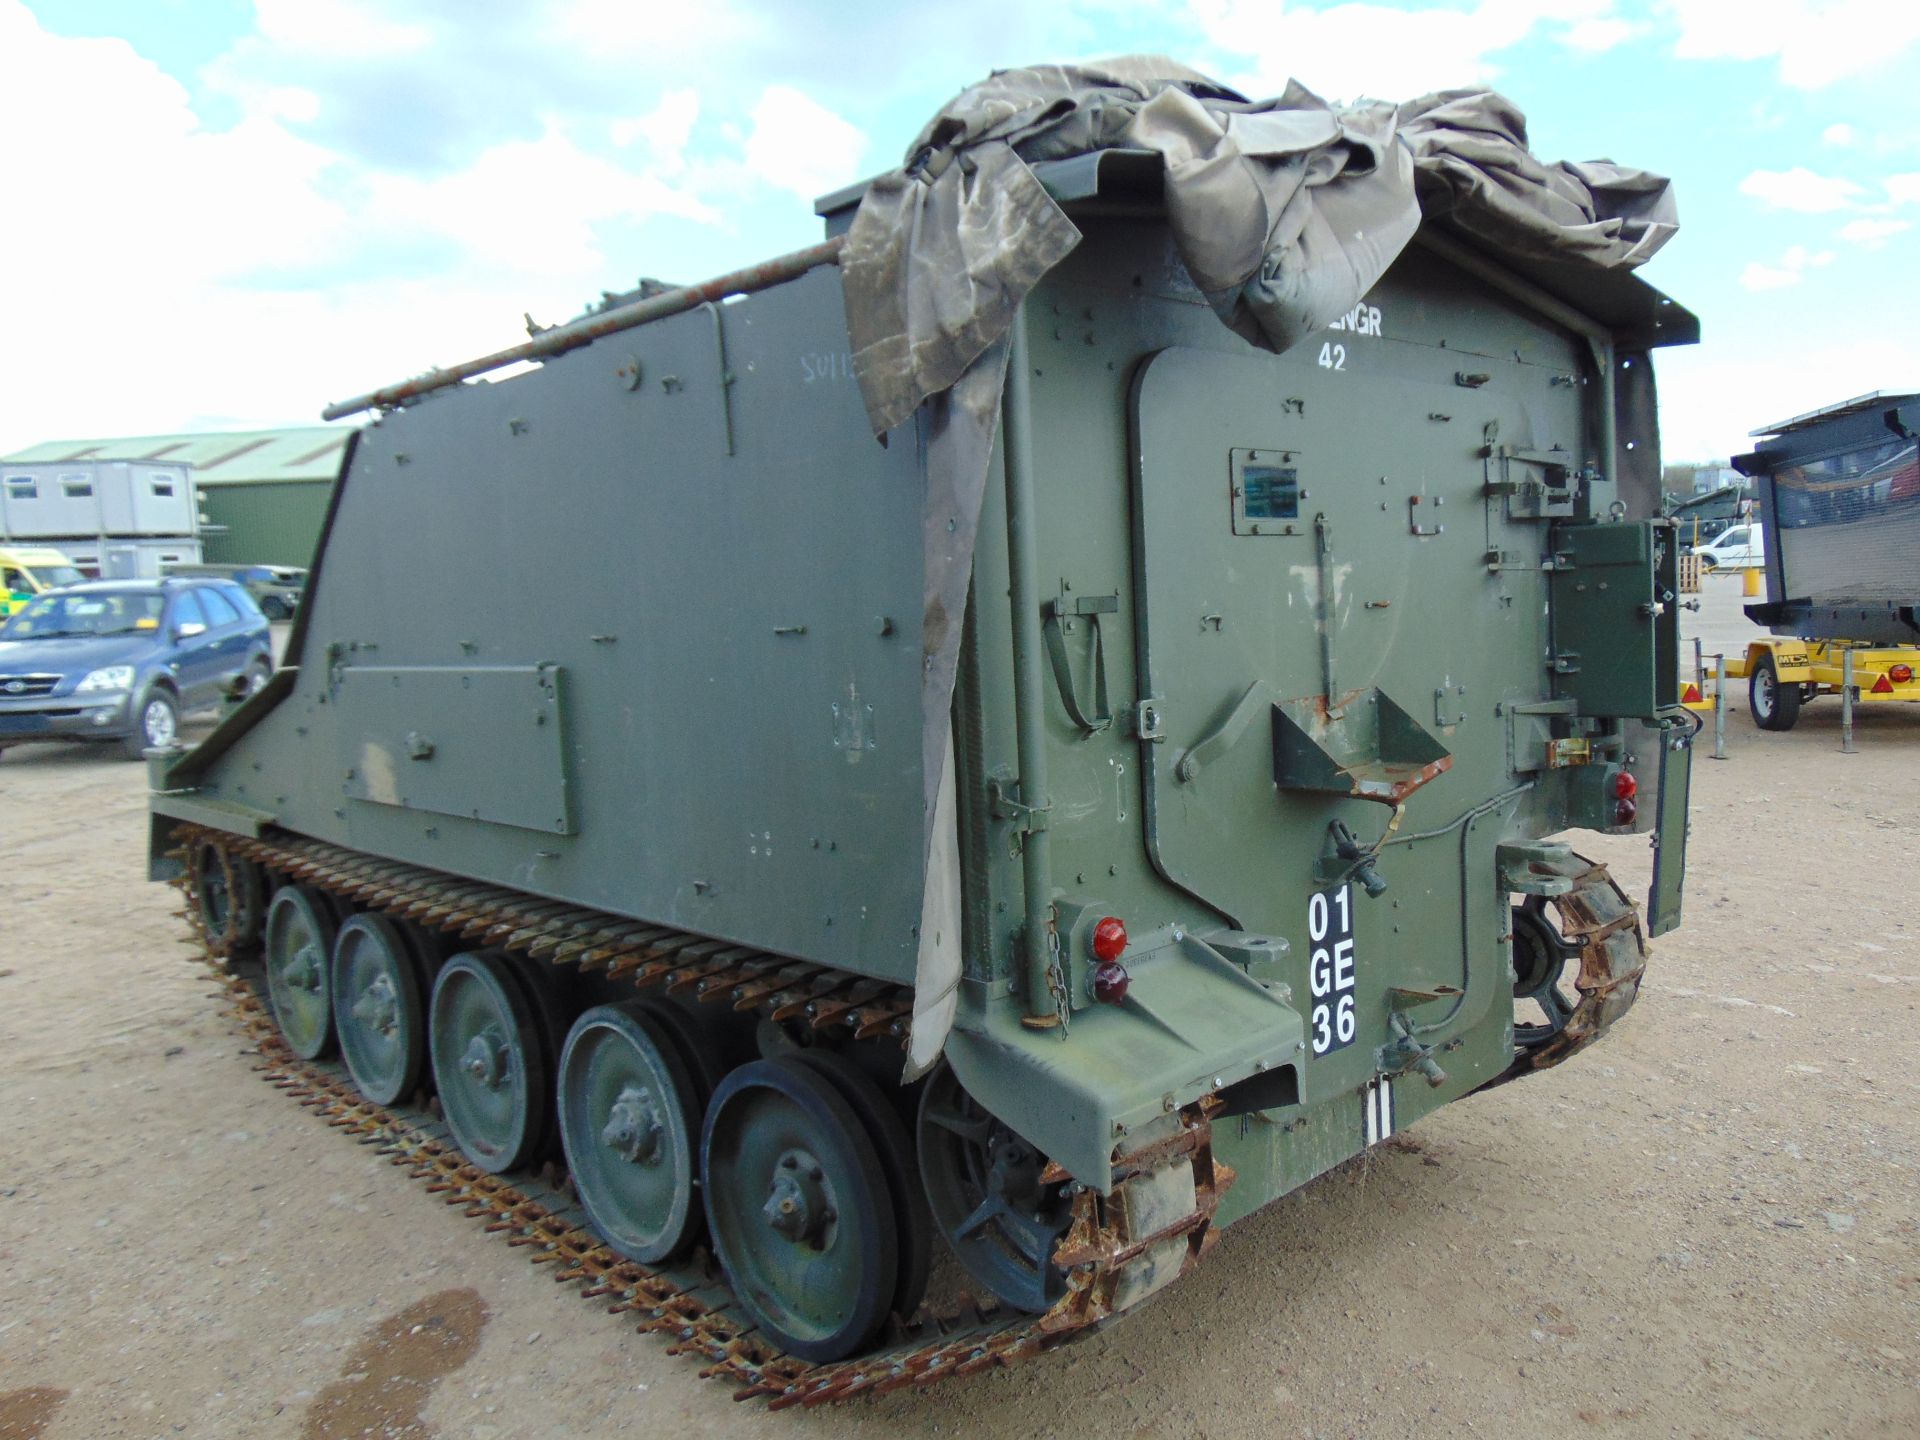 CVRT (Combat Vehicle Reconnaissance Tracked) FV105 Sultan Armoured Personnel Carrier - Image 5 of 25